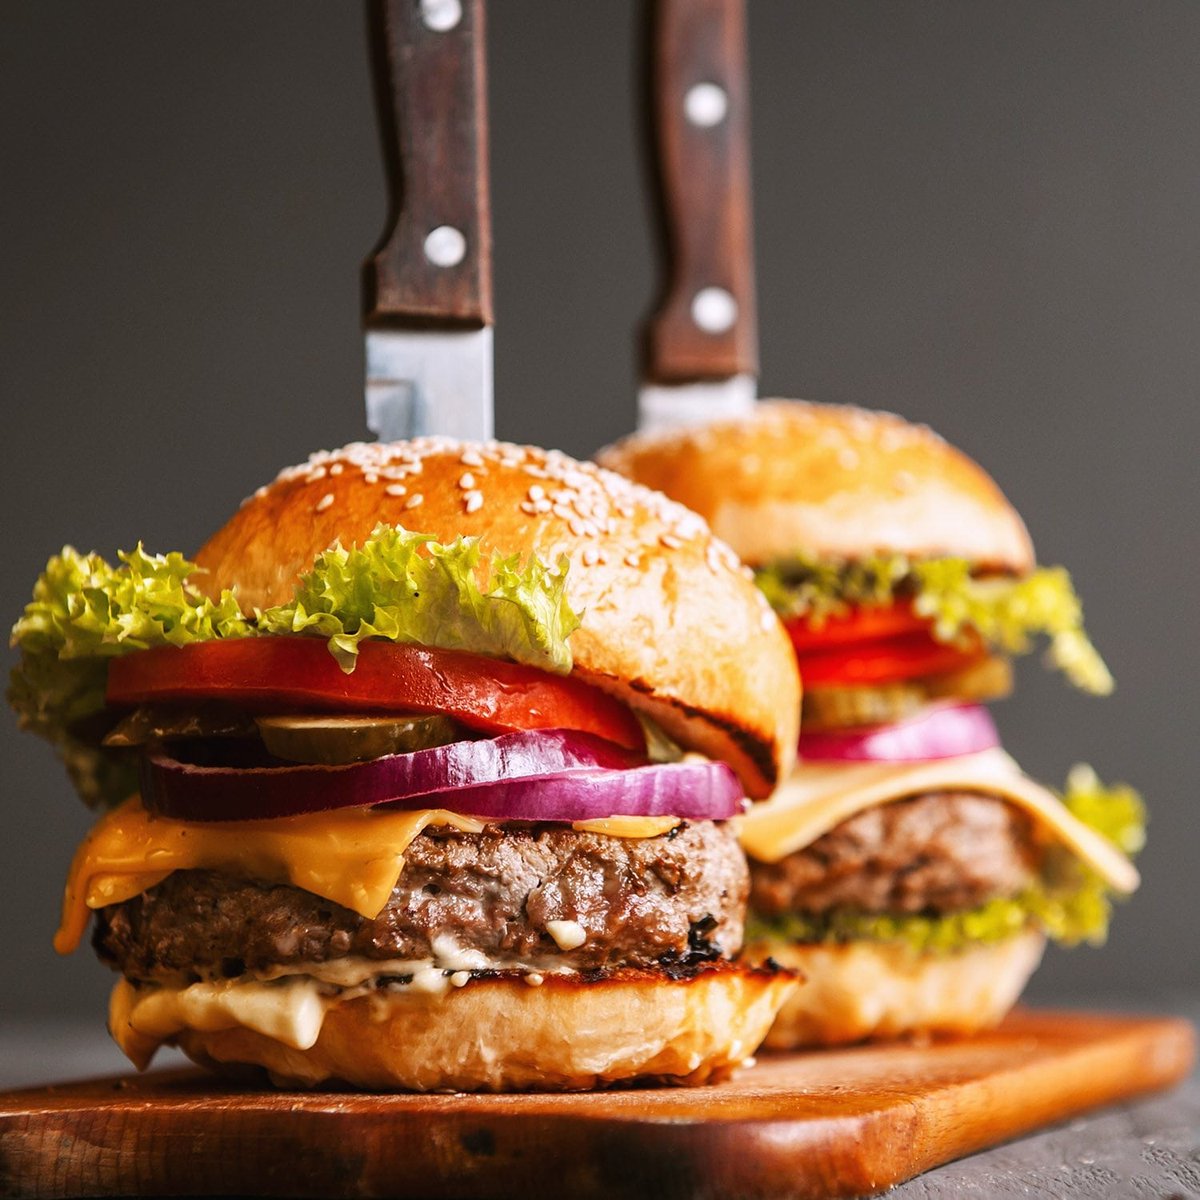 Re-think the #BeefBurger. It’s not just good but good for you! Yes - it’s true. The most nutrient dense part of the ‘fast food meal’ is the #beef between the bun. And ok, the tomato and the lettuce help too. An all-beef patty has a lot going for it! thinkbeef.ca/if-you-think-t…